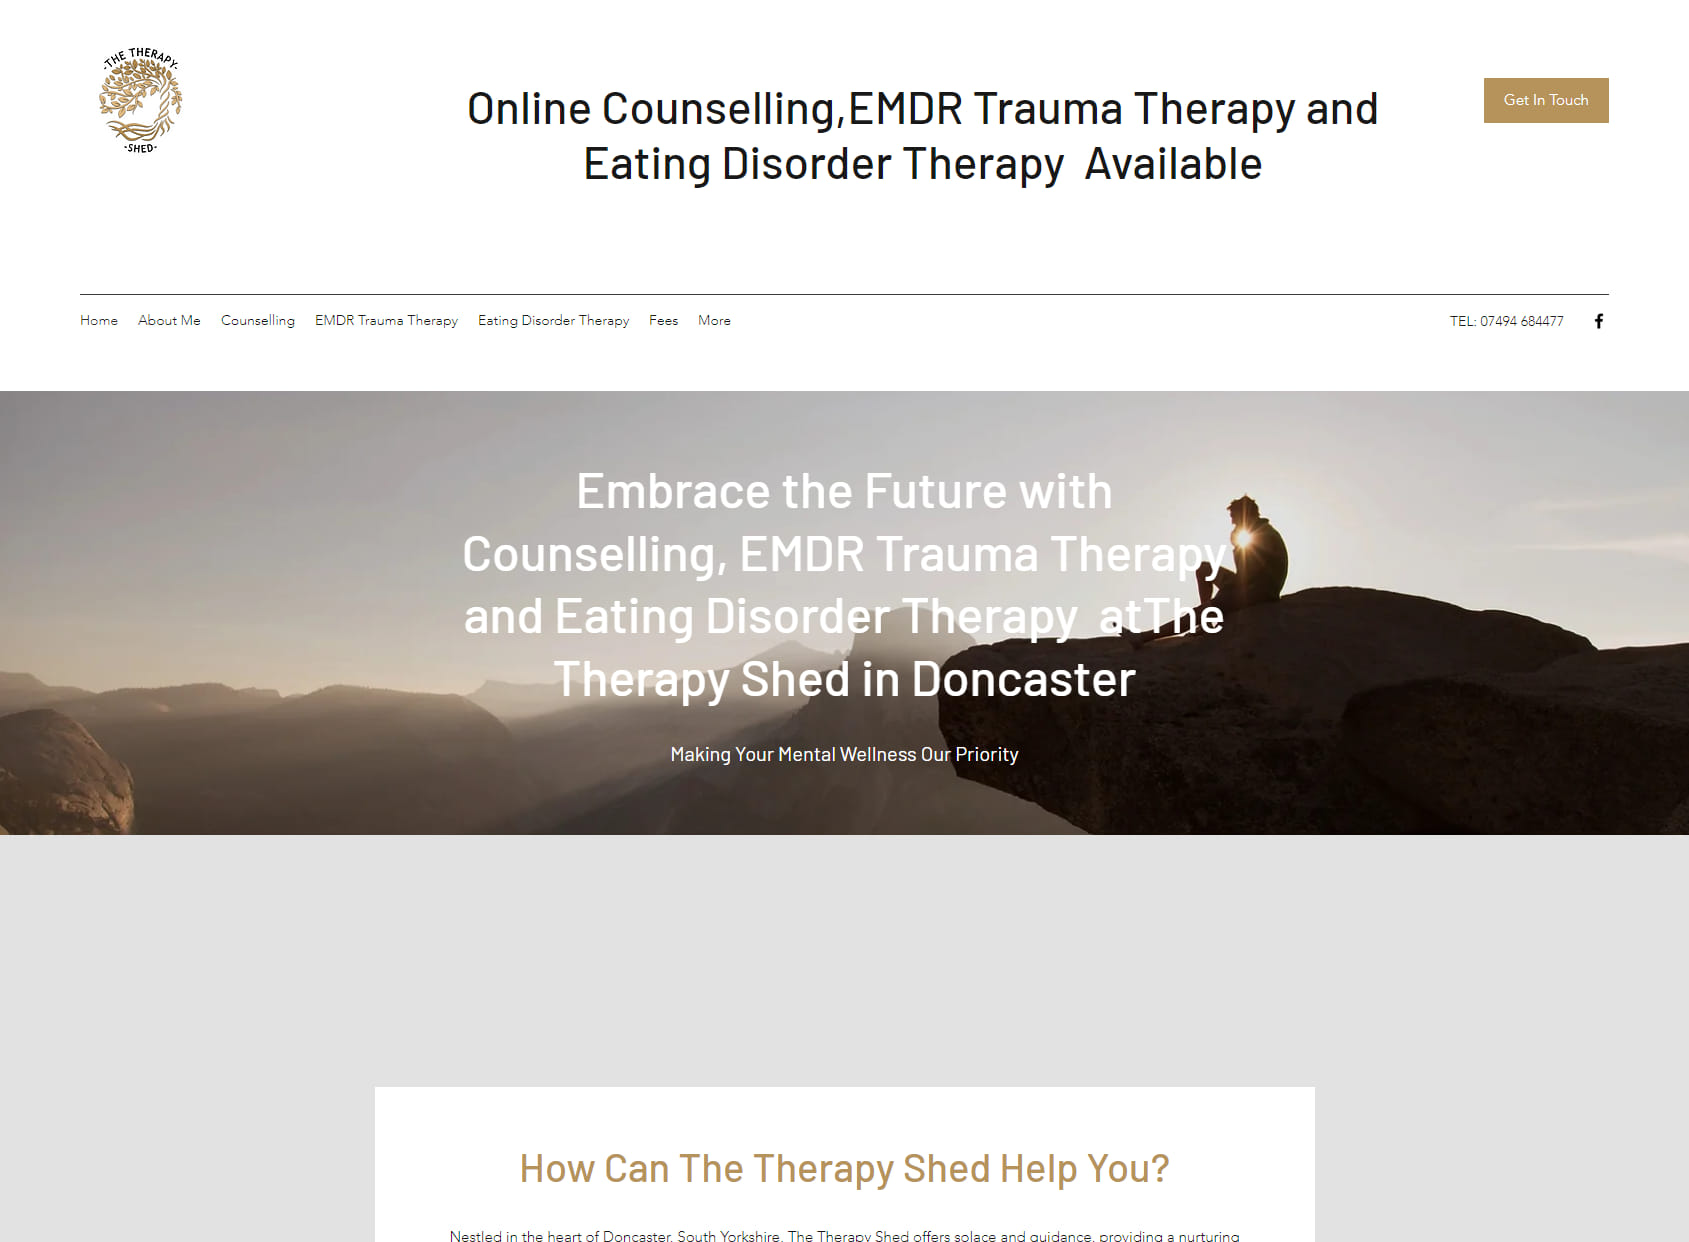 The Therapy Shed - Counselling, EMDR and Eating Disorder Therapy In Doncaster